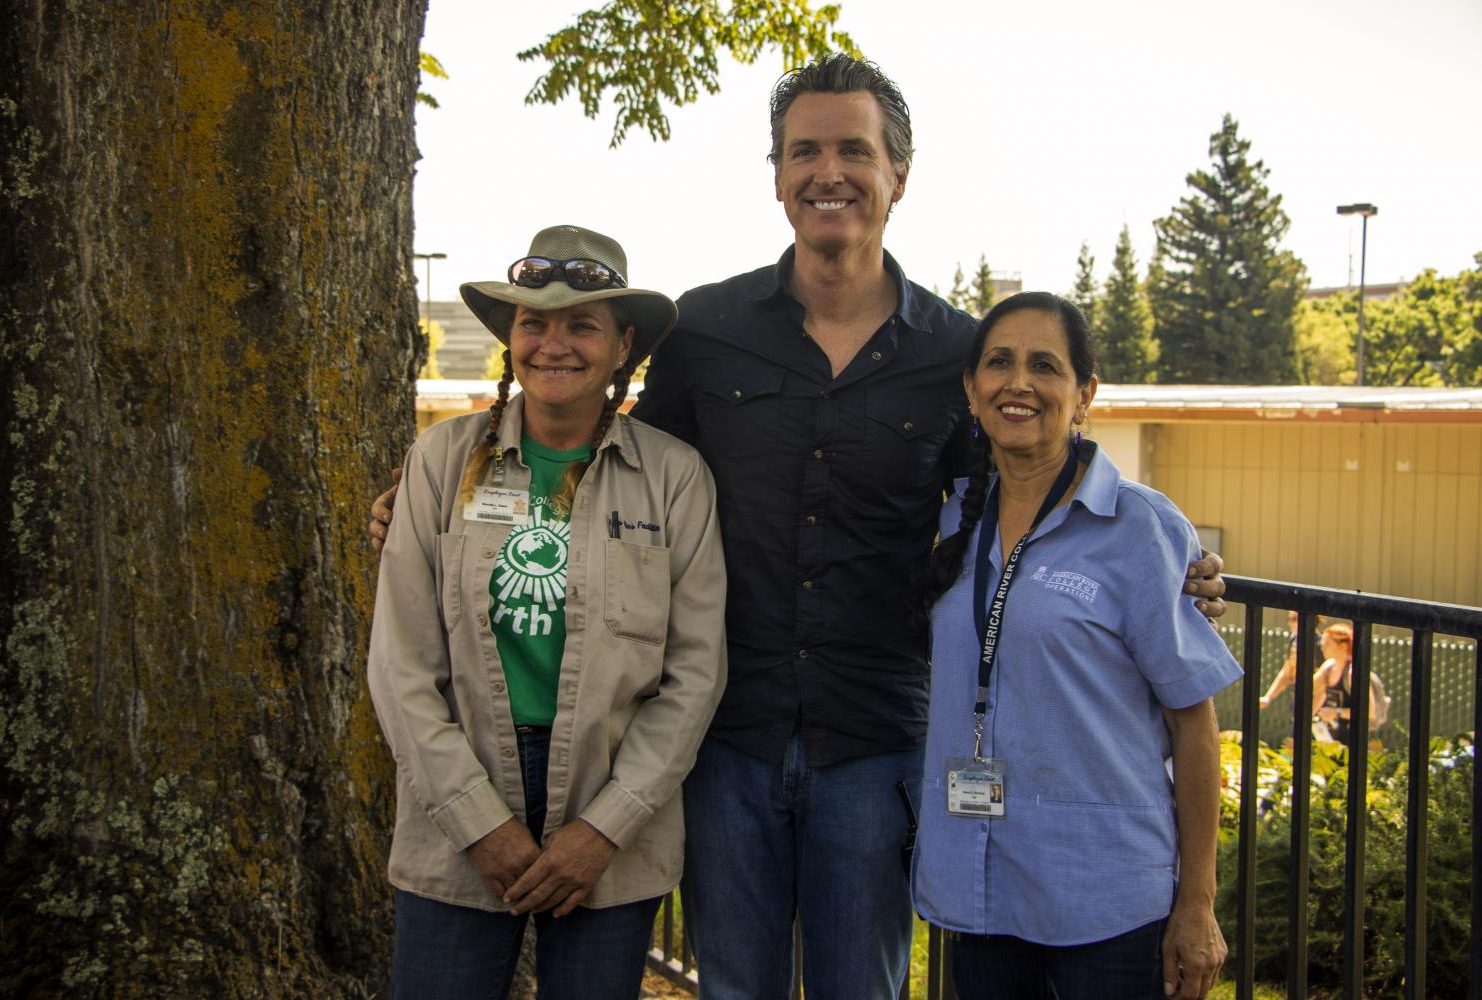 Governor Gavin Christopher Newsom poses with Brenda Baker (left) and Maria Arambula (right) after job shadowing them during International Workers’ Day at American River College on May 1, 2019. (Photo by Ashley Hayes-Stone) Download Permiss